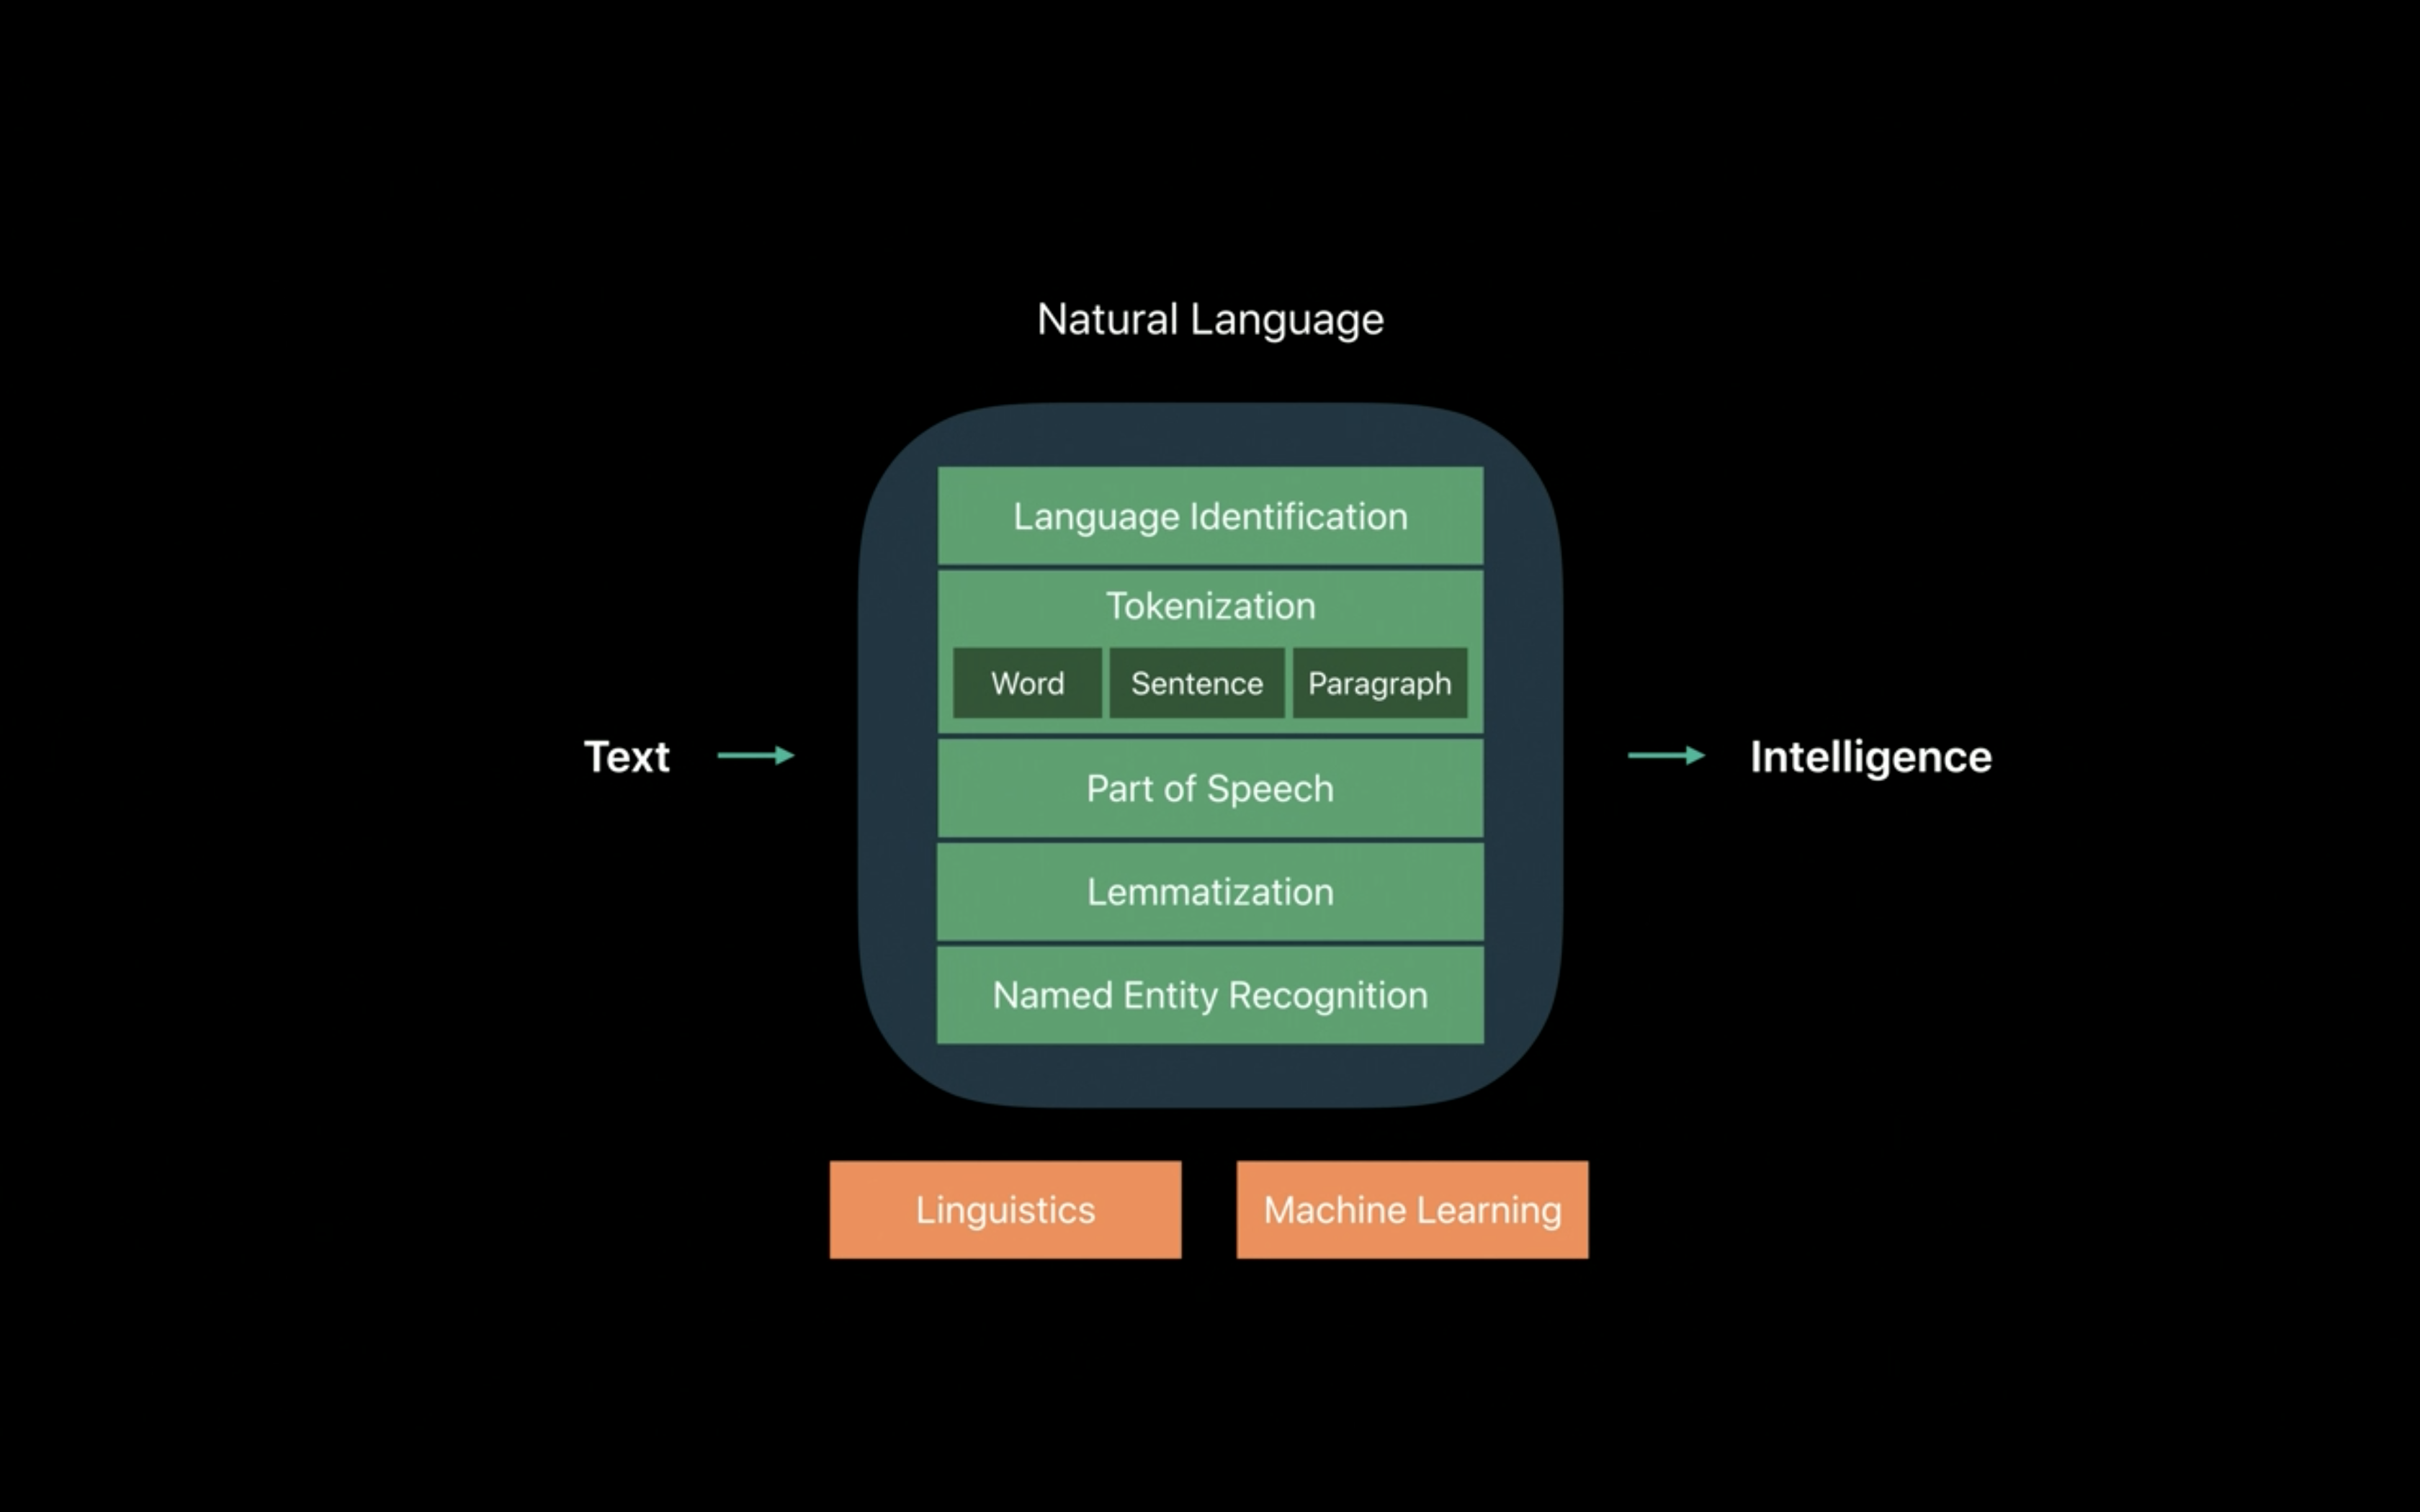 Schematic of the natural language framework